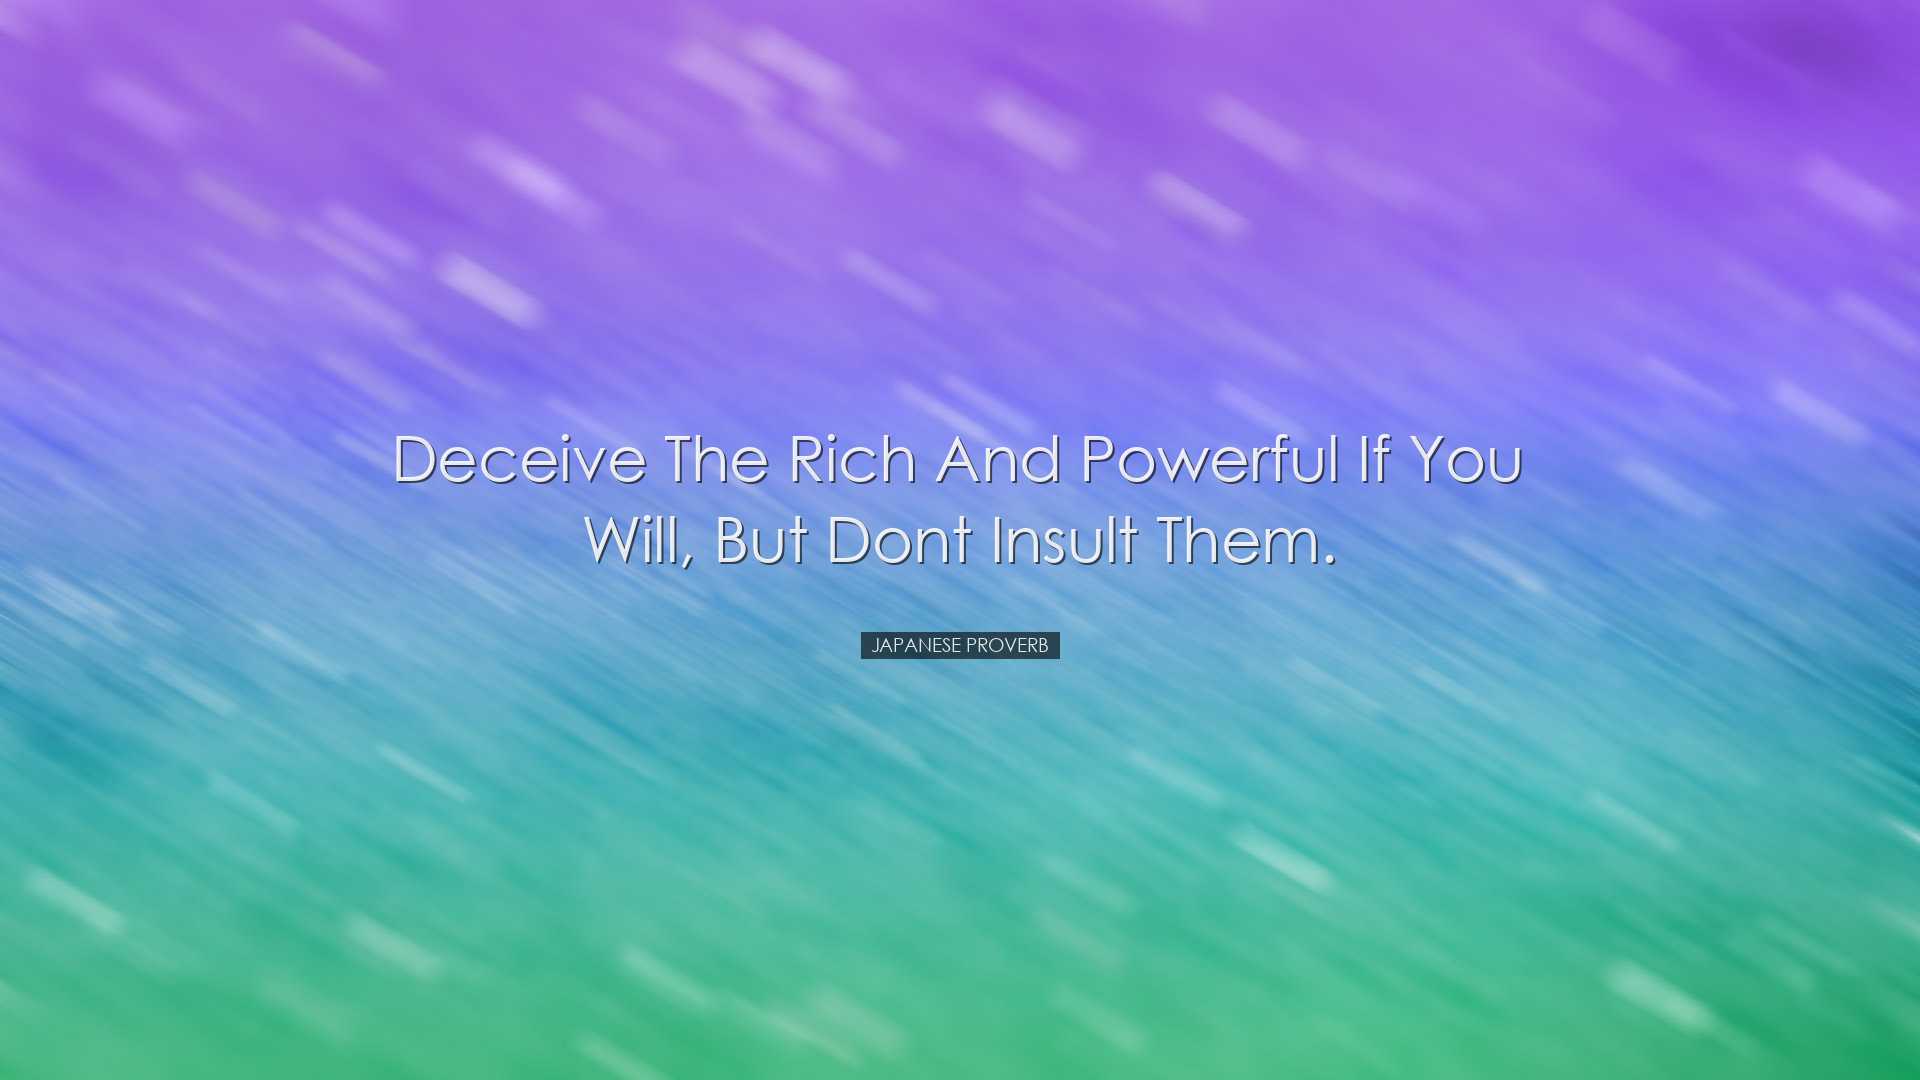 Deceive the rich and powerful if you will, but dont insult them. -